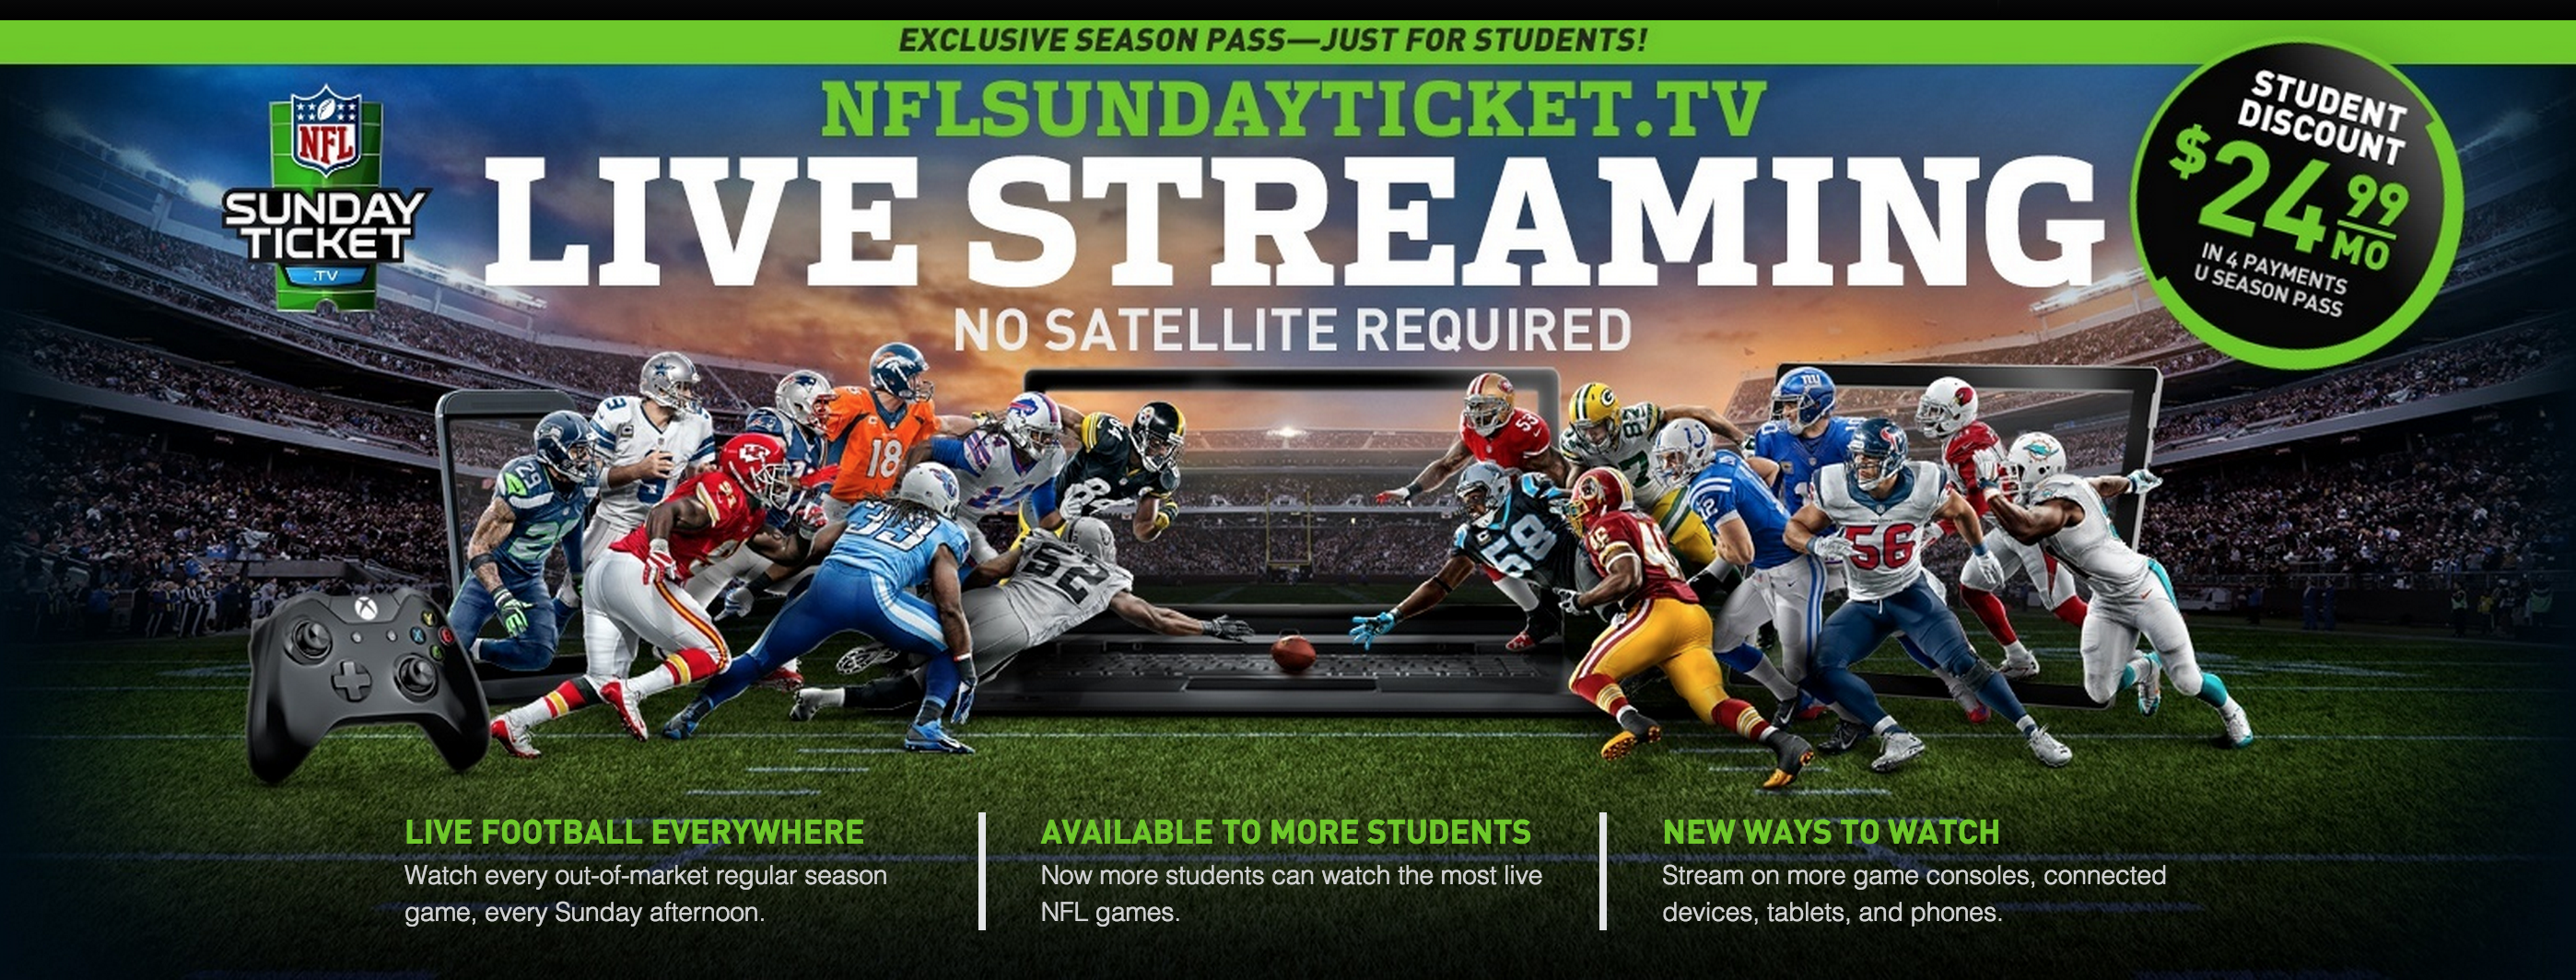 Stream nearly every NFL game for $100 w/ an eligible .edu email